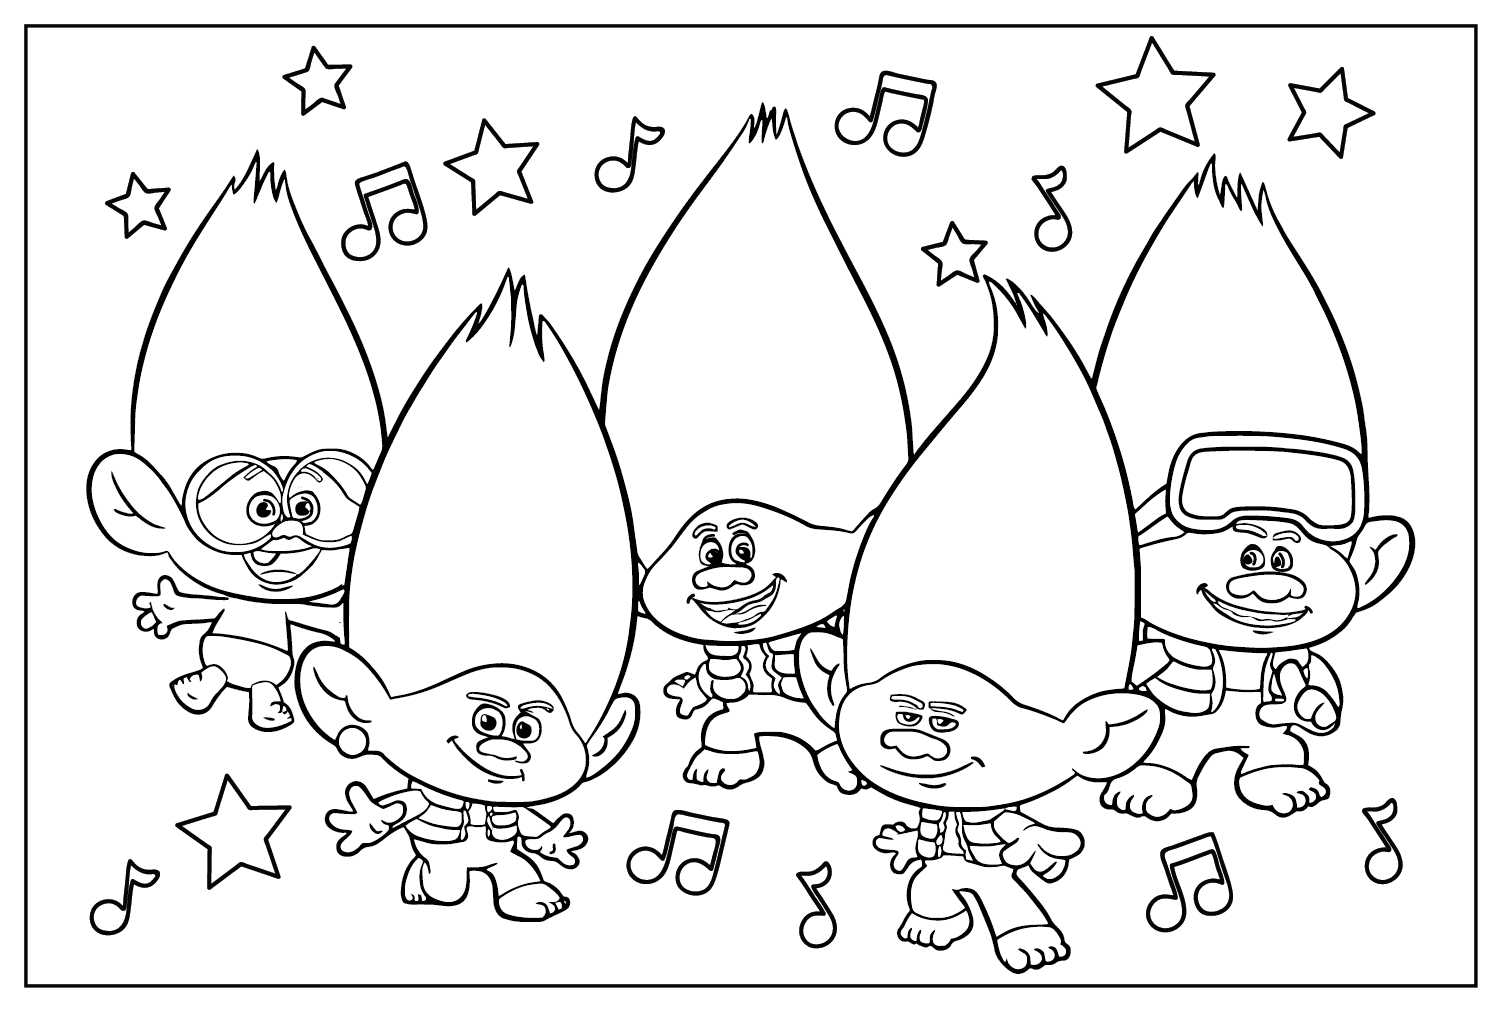 Color Page Trolls Band Together - Free Printable Coloring Pages